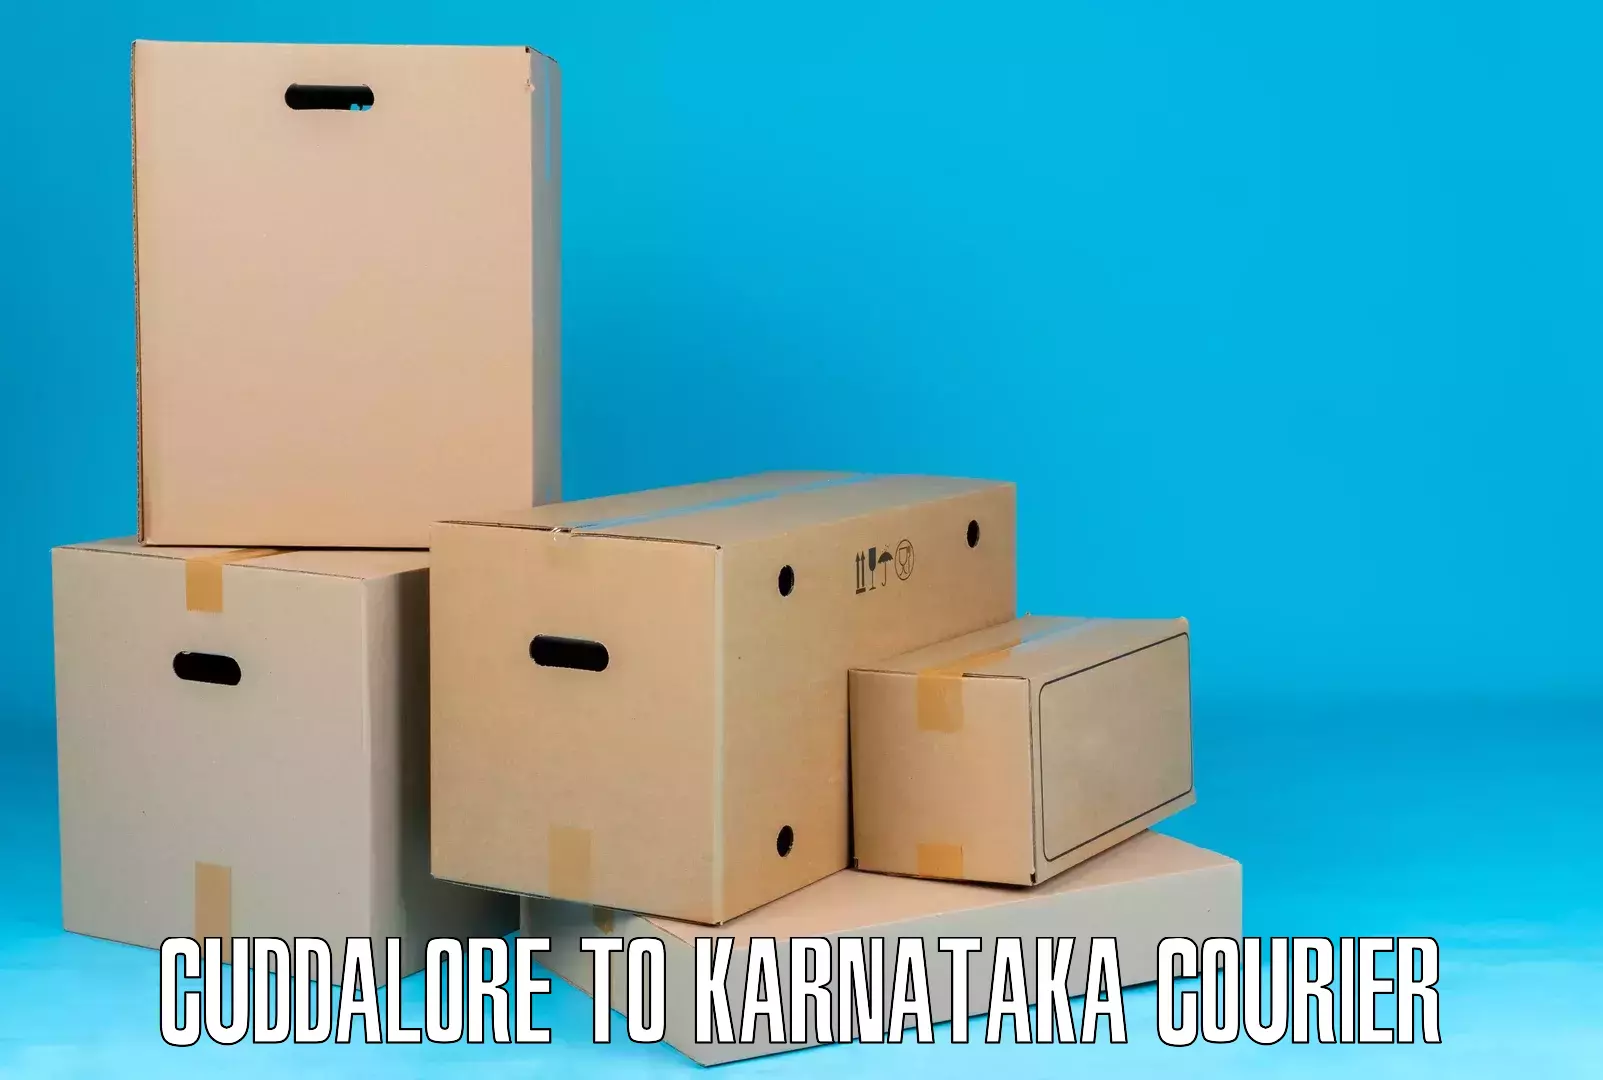 State-of-the-art courier technology Cuddalore to Kundapura